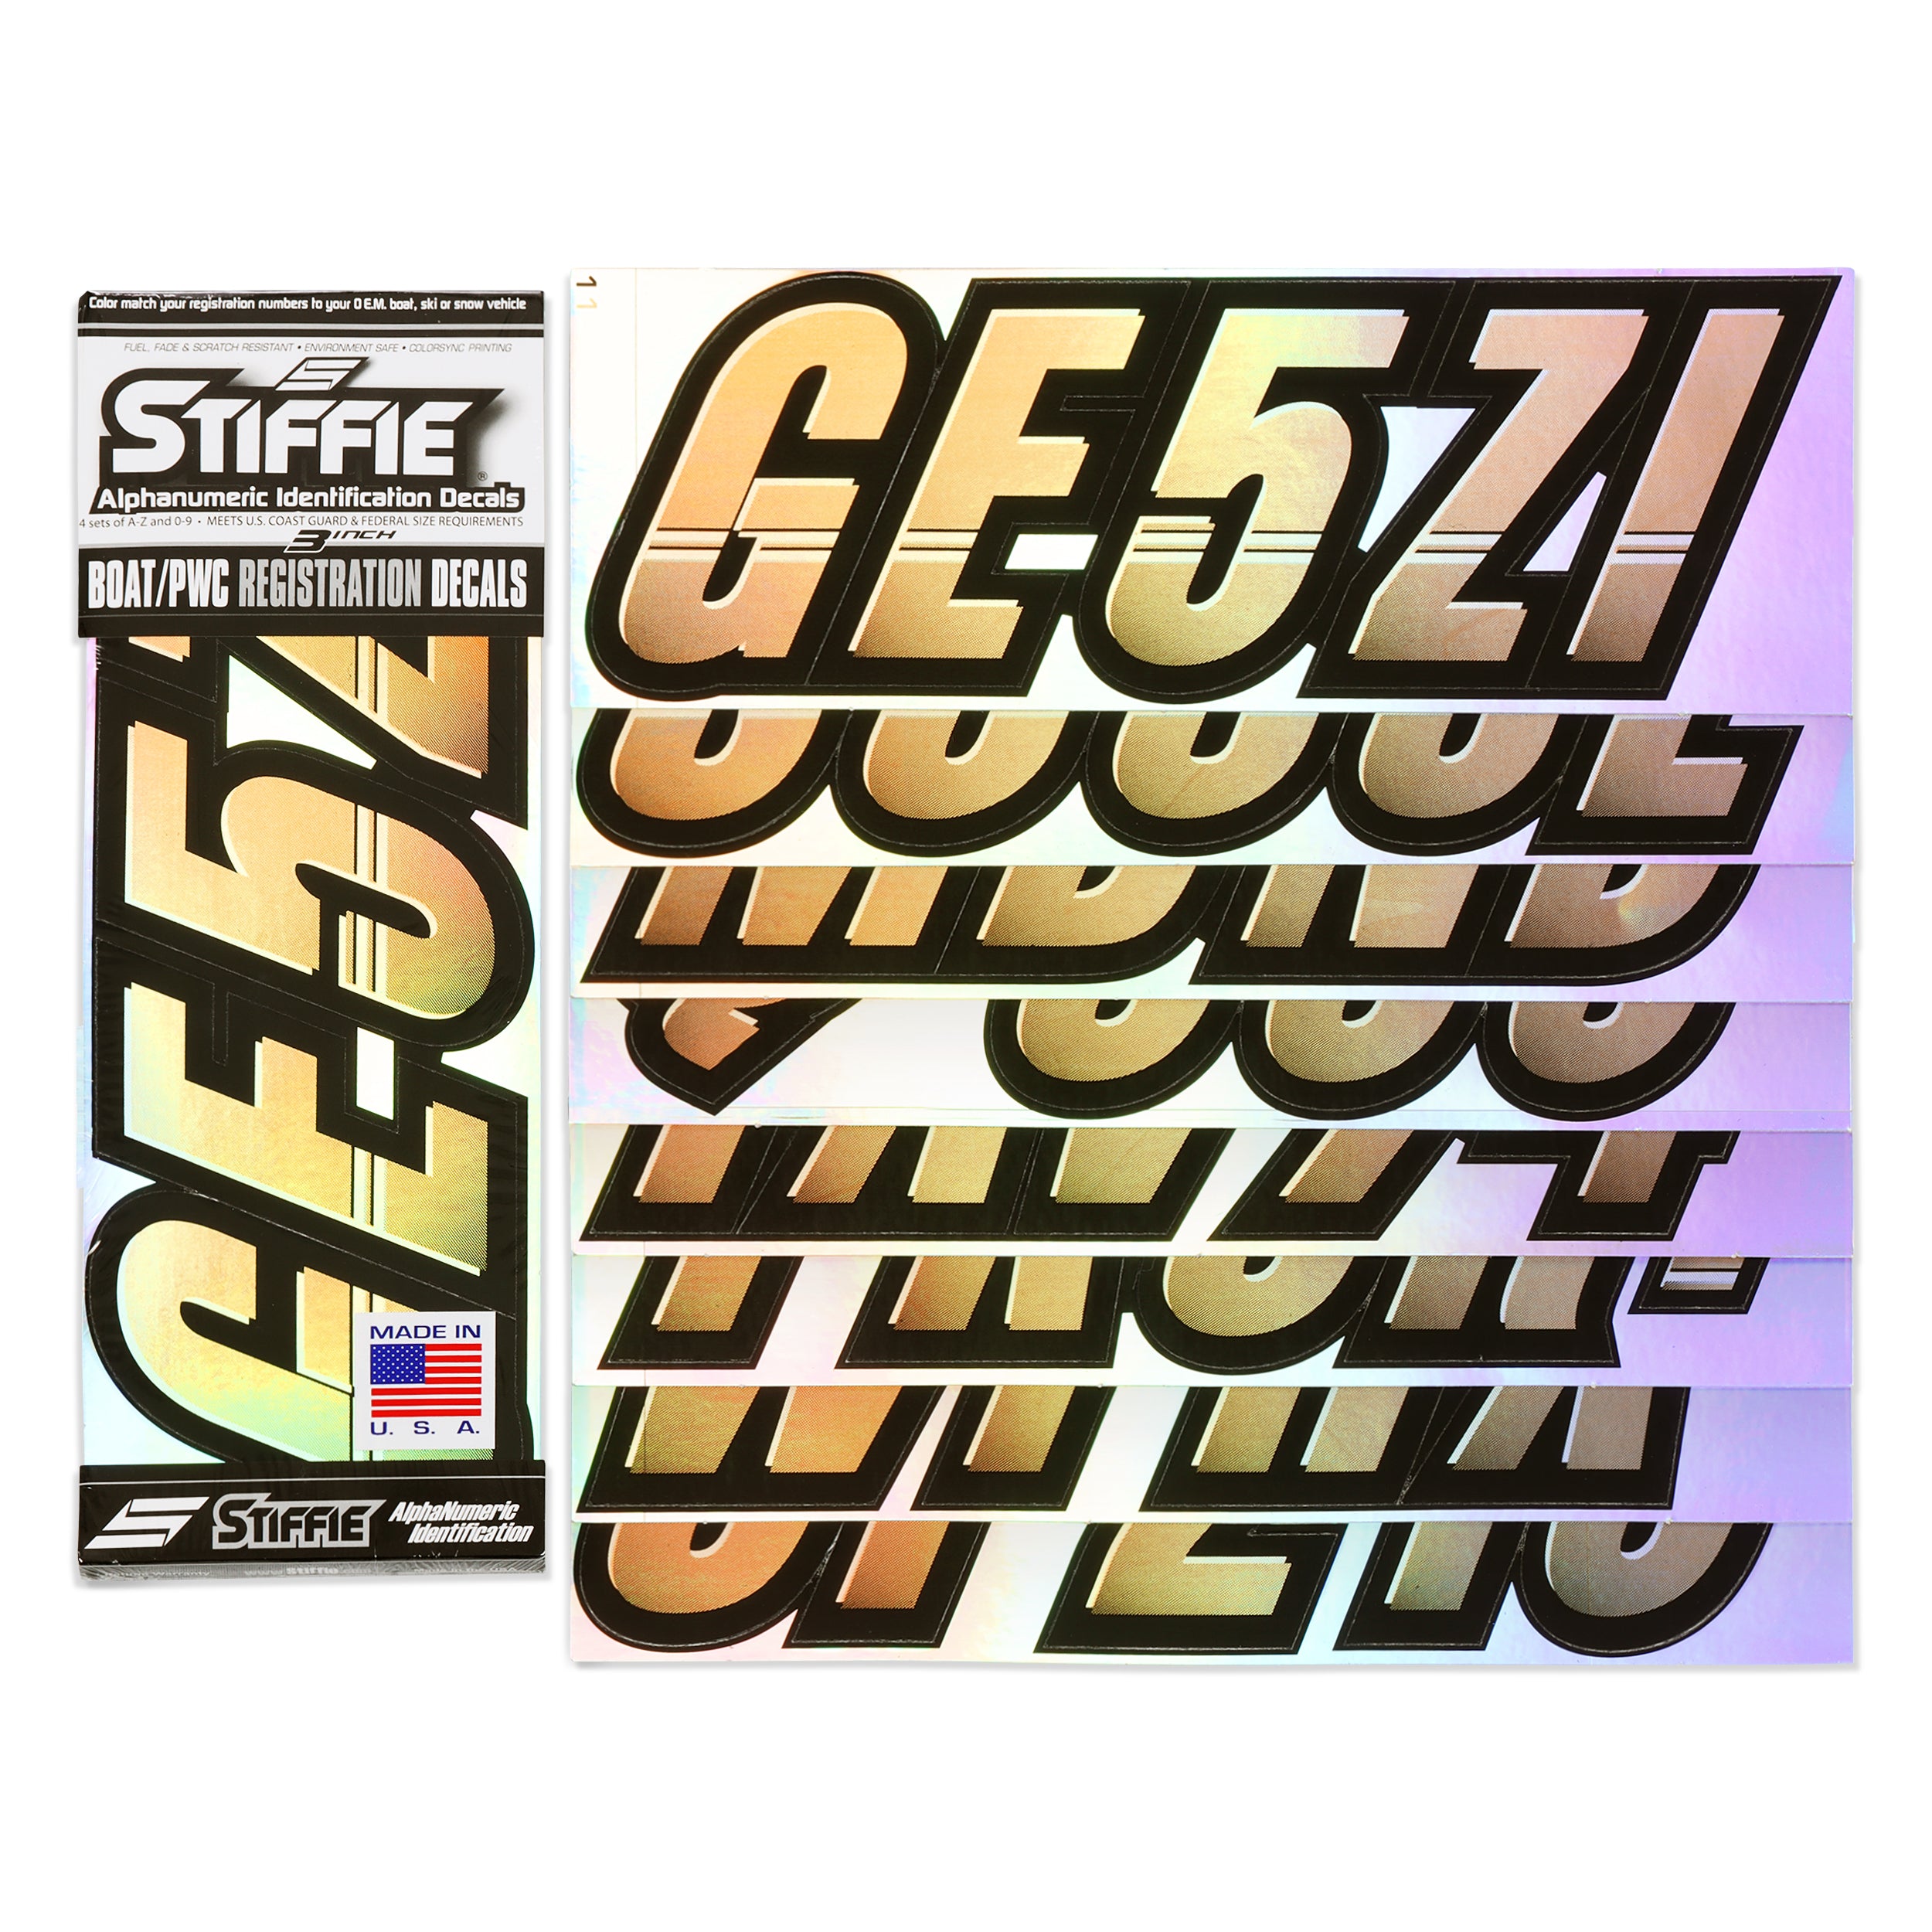 Stiffie Techtron Reflective Gold/Black 3" Alpha-Numeric Registration Identification Numbers Stickers Decals for Boats & Personal Watercraft